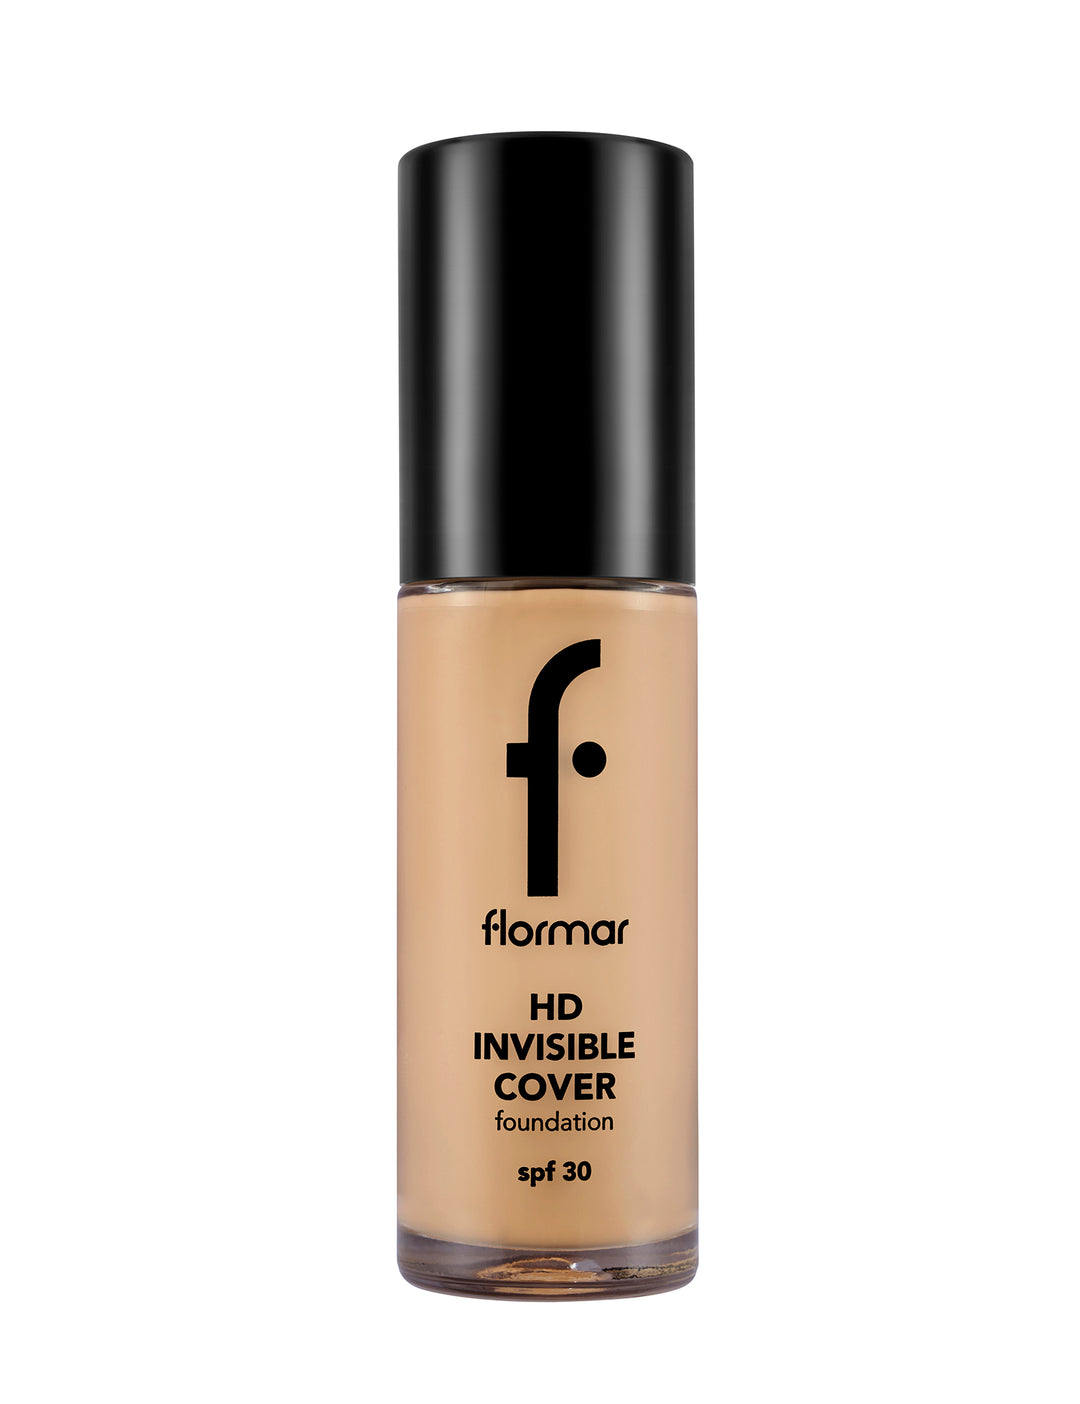 HD Invisible Cover Foundation - 30ml